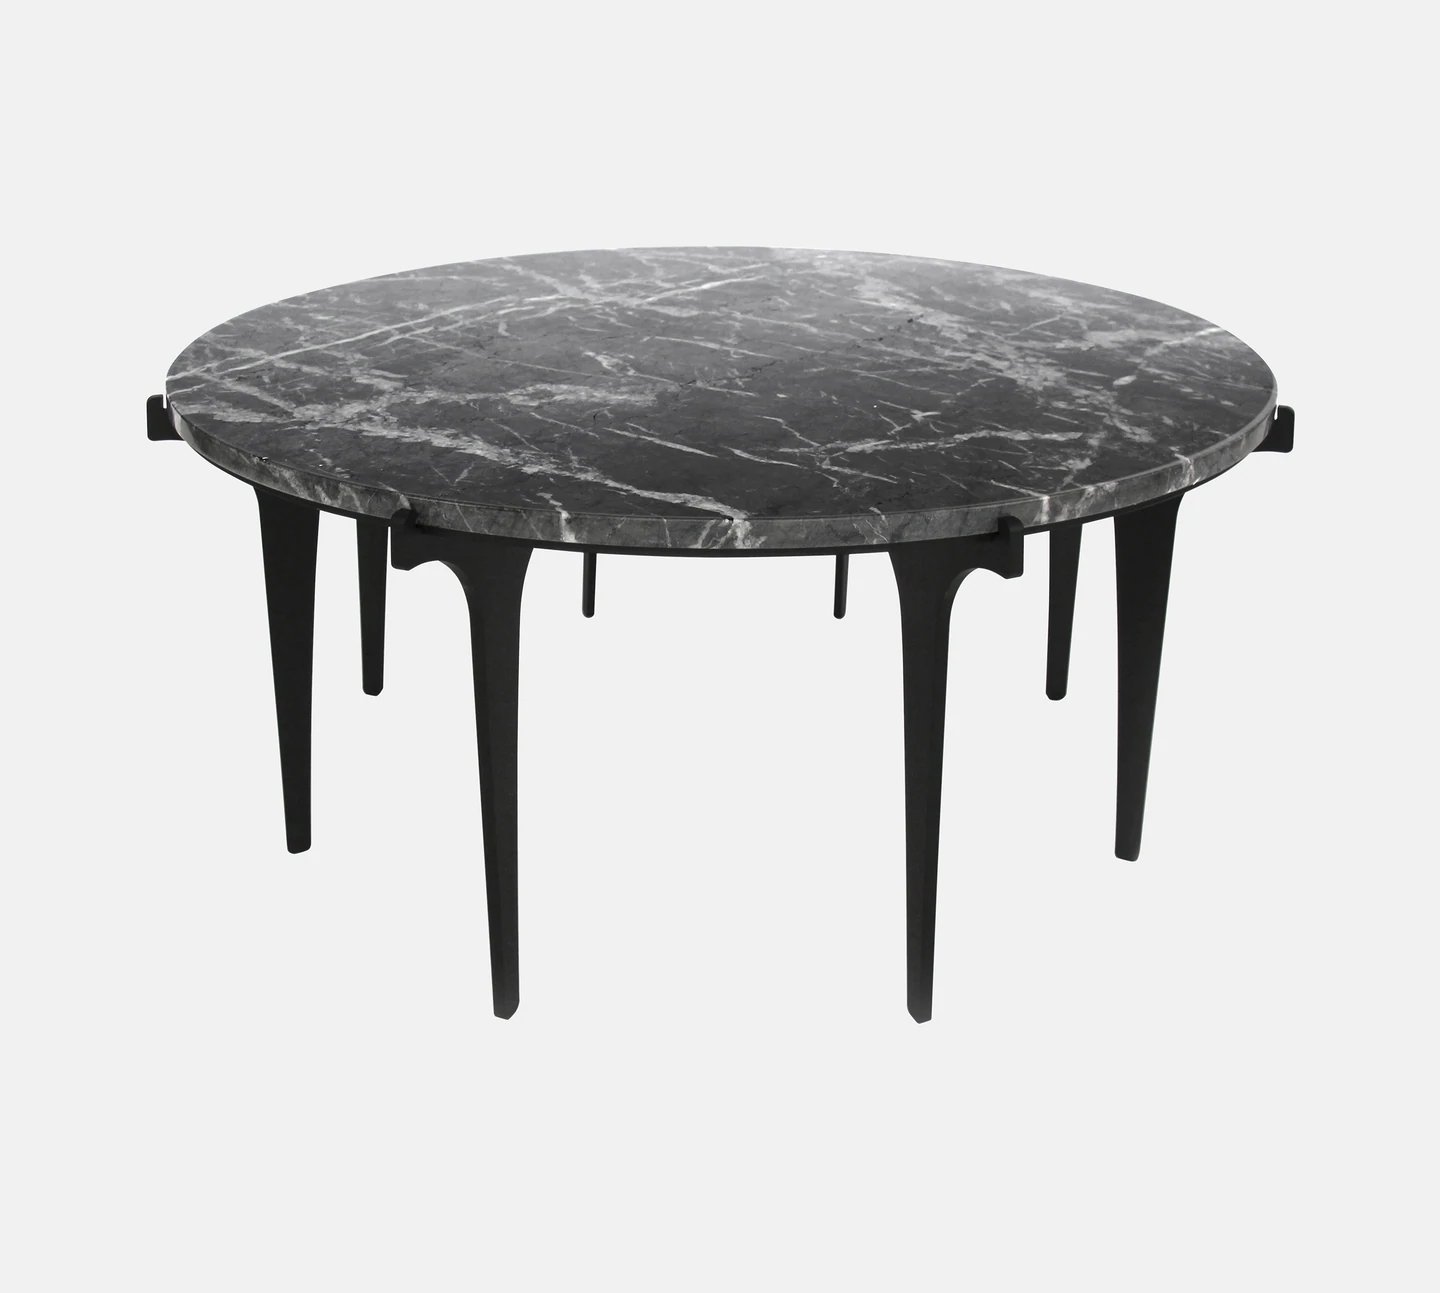 PRONG ROUND COFFEE TABLE